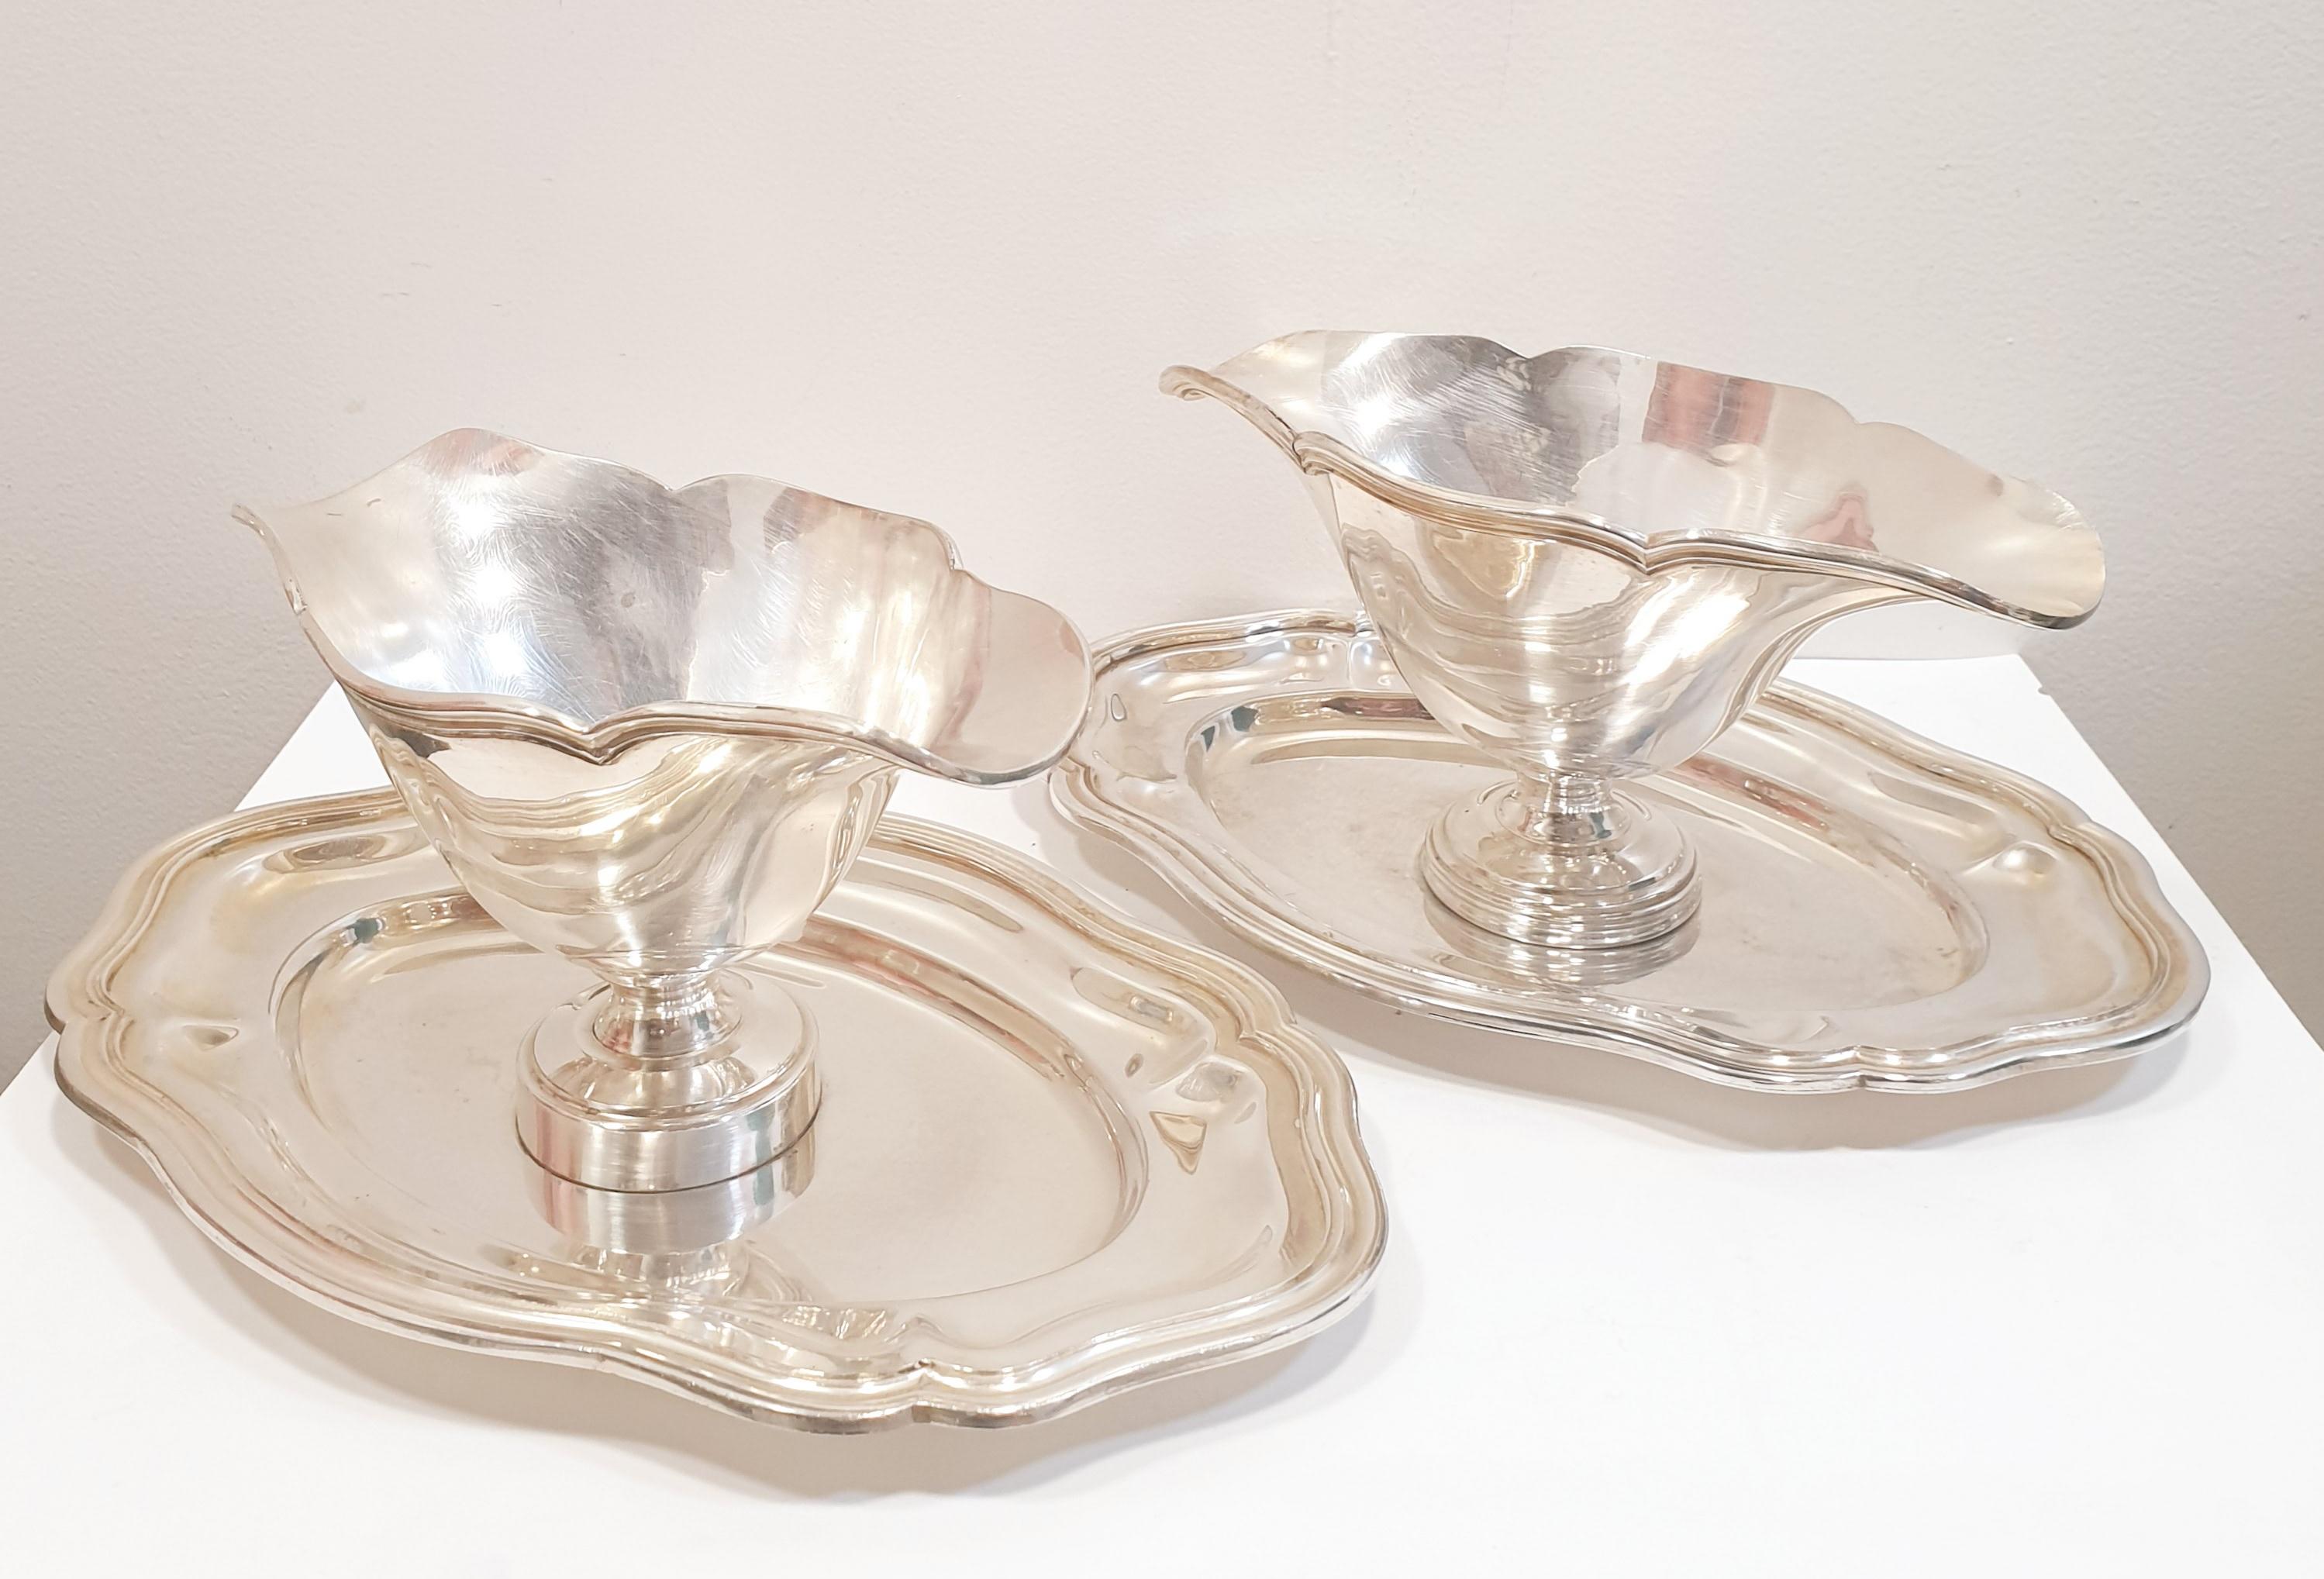 Set of 2 antique silver sauce boats from the 19th Century

PRADERA is a second generation of a family run business jewelers of reference in Spain, with a rich track record being official distributers of prime European jewelry brands like Chanel,